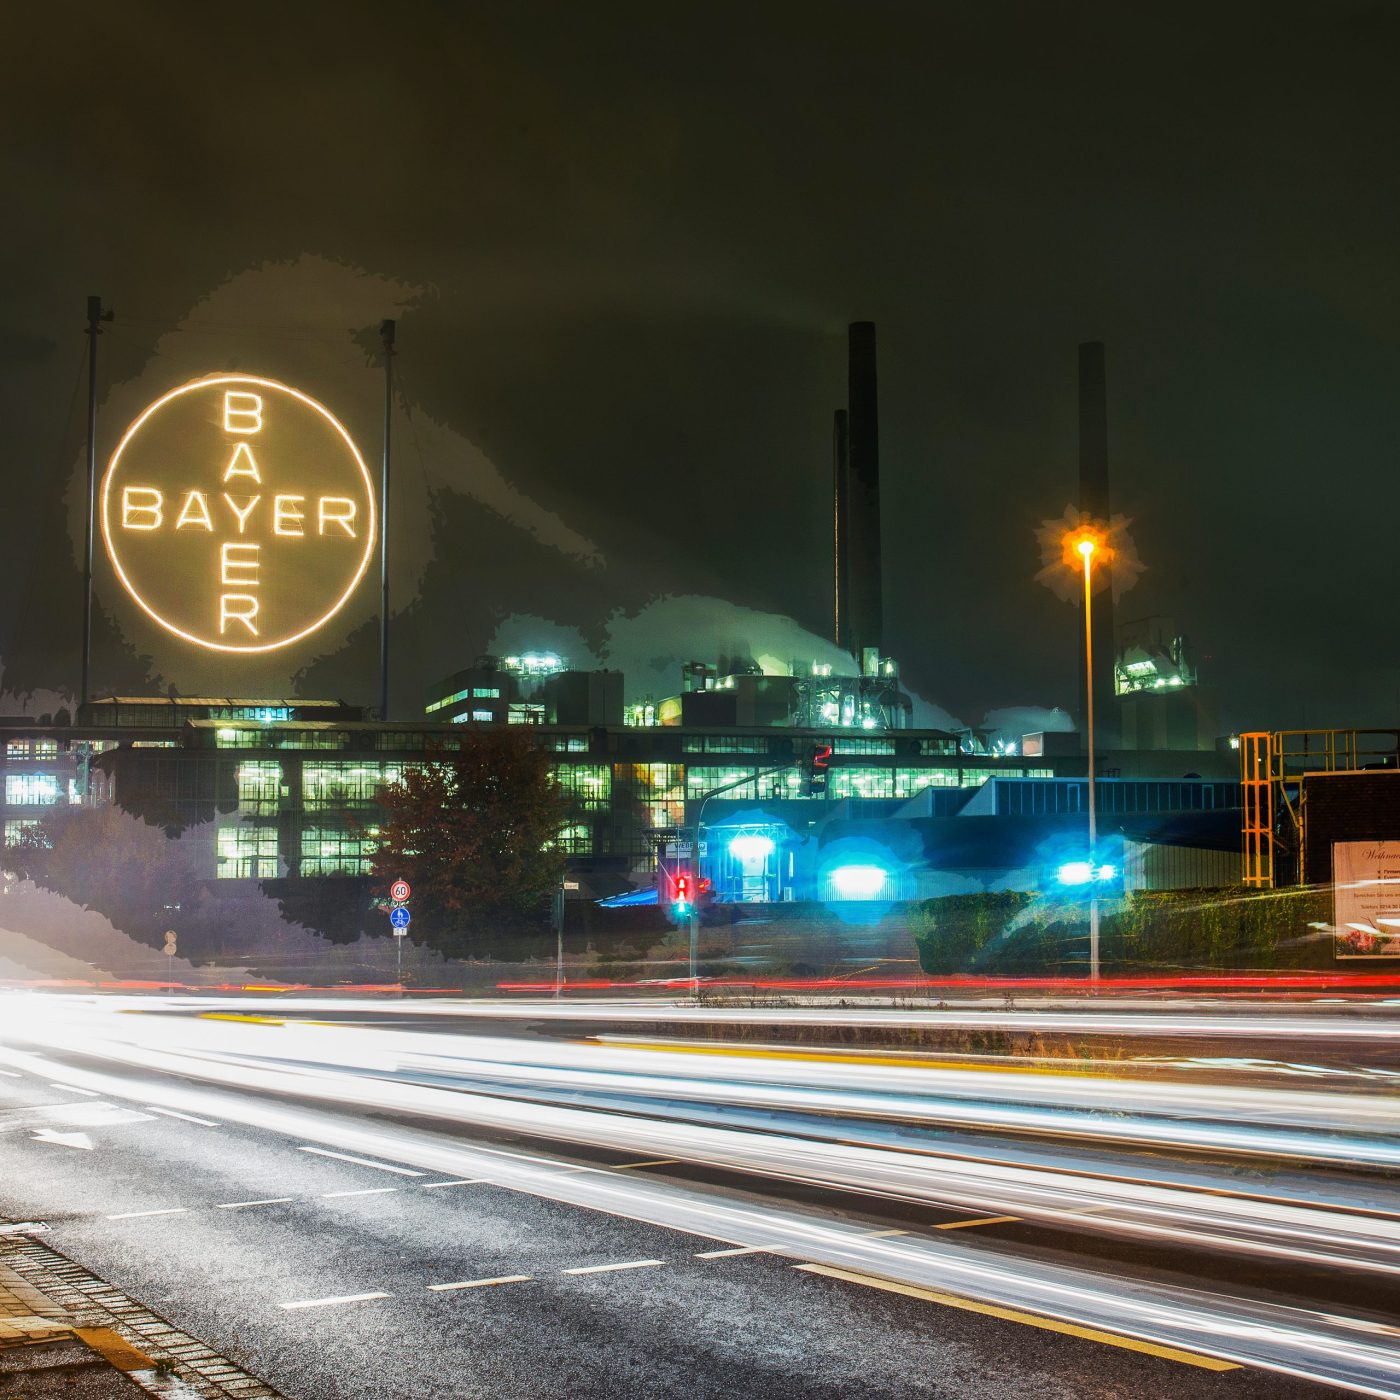 10-25-2015  Leverkusen Germnany  Awe view in night at Sign BAYER   on  buildings of chemical industry   in Leverkusen  and